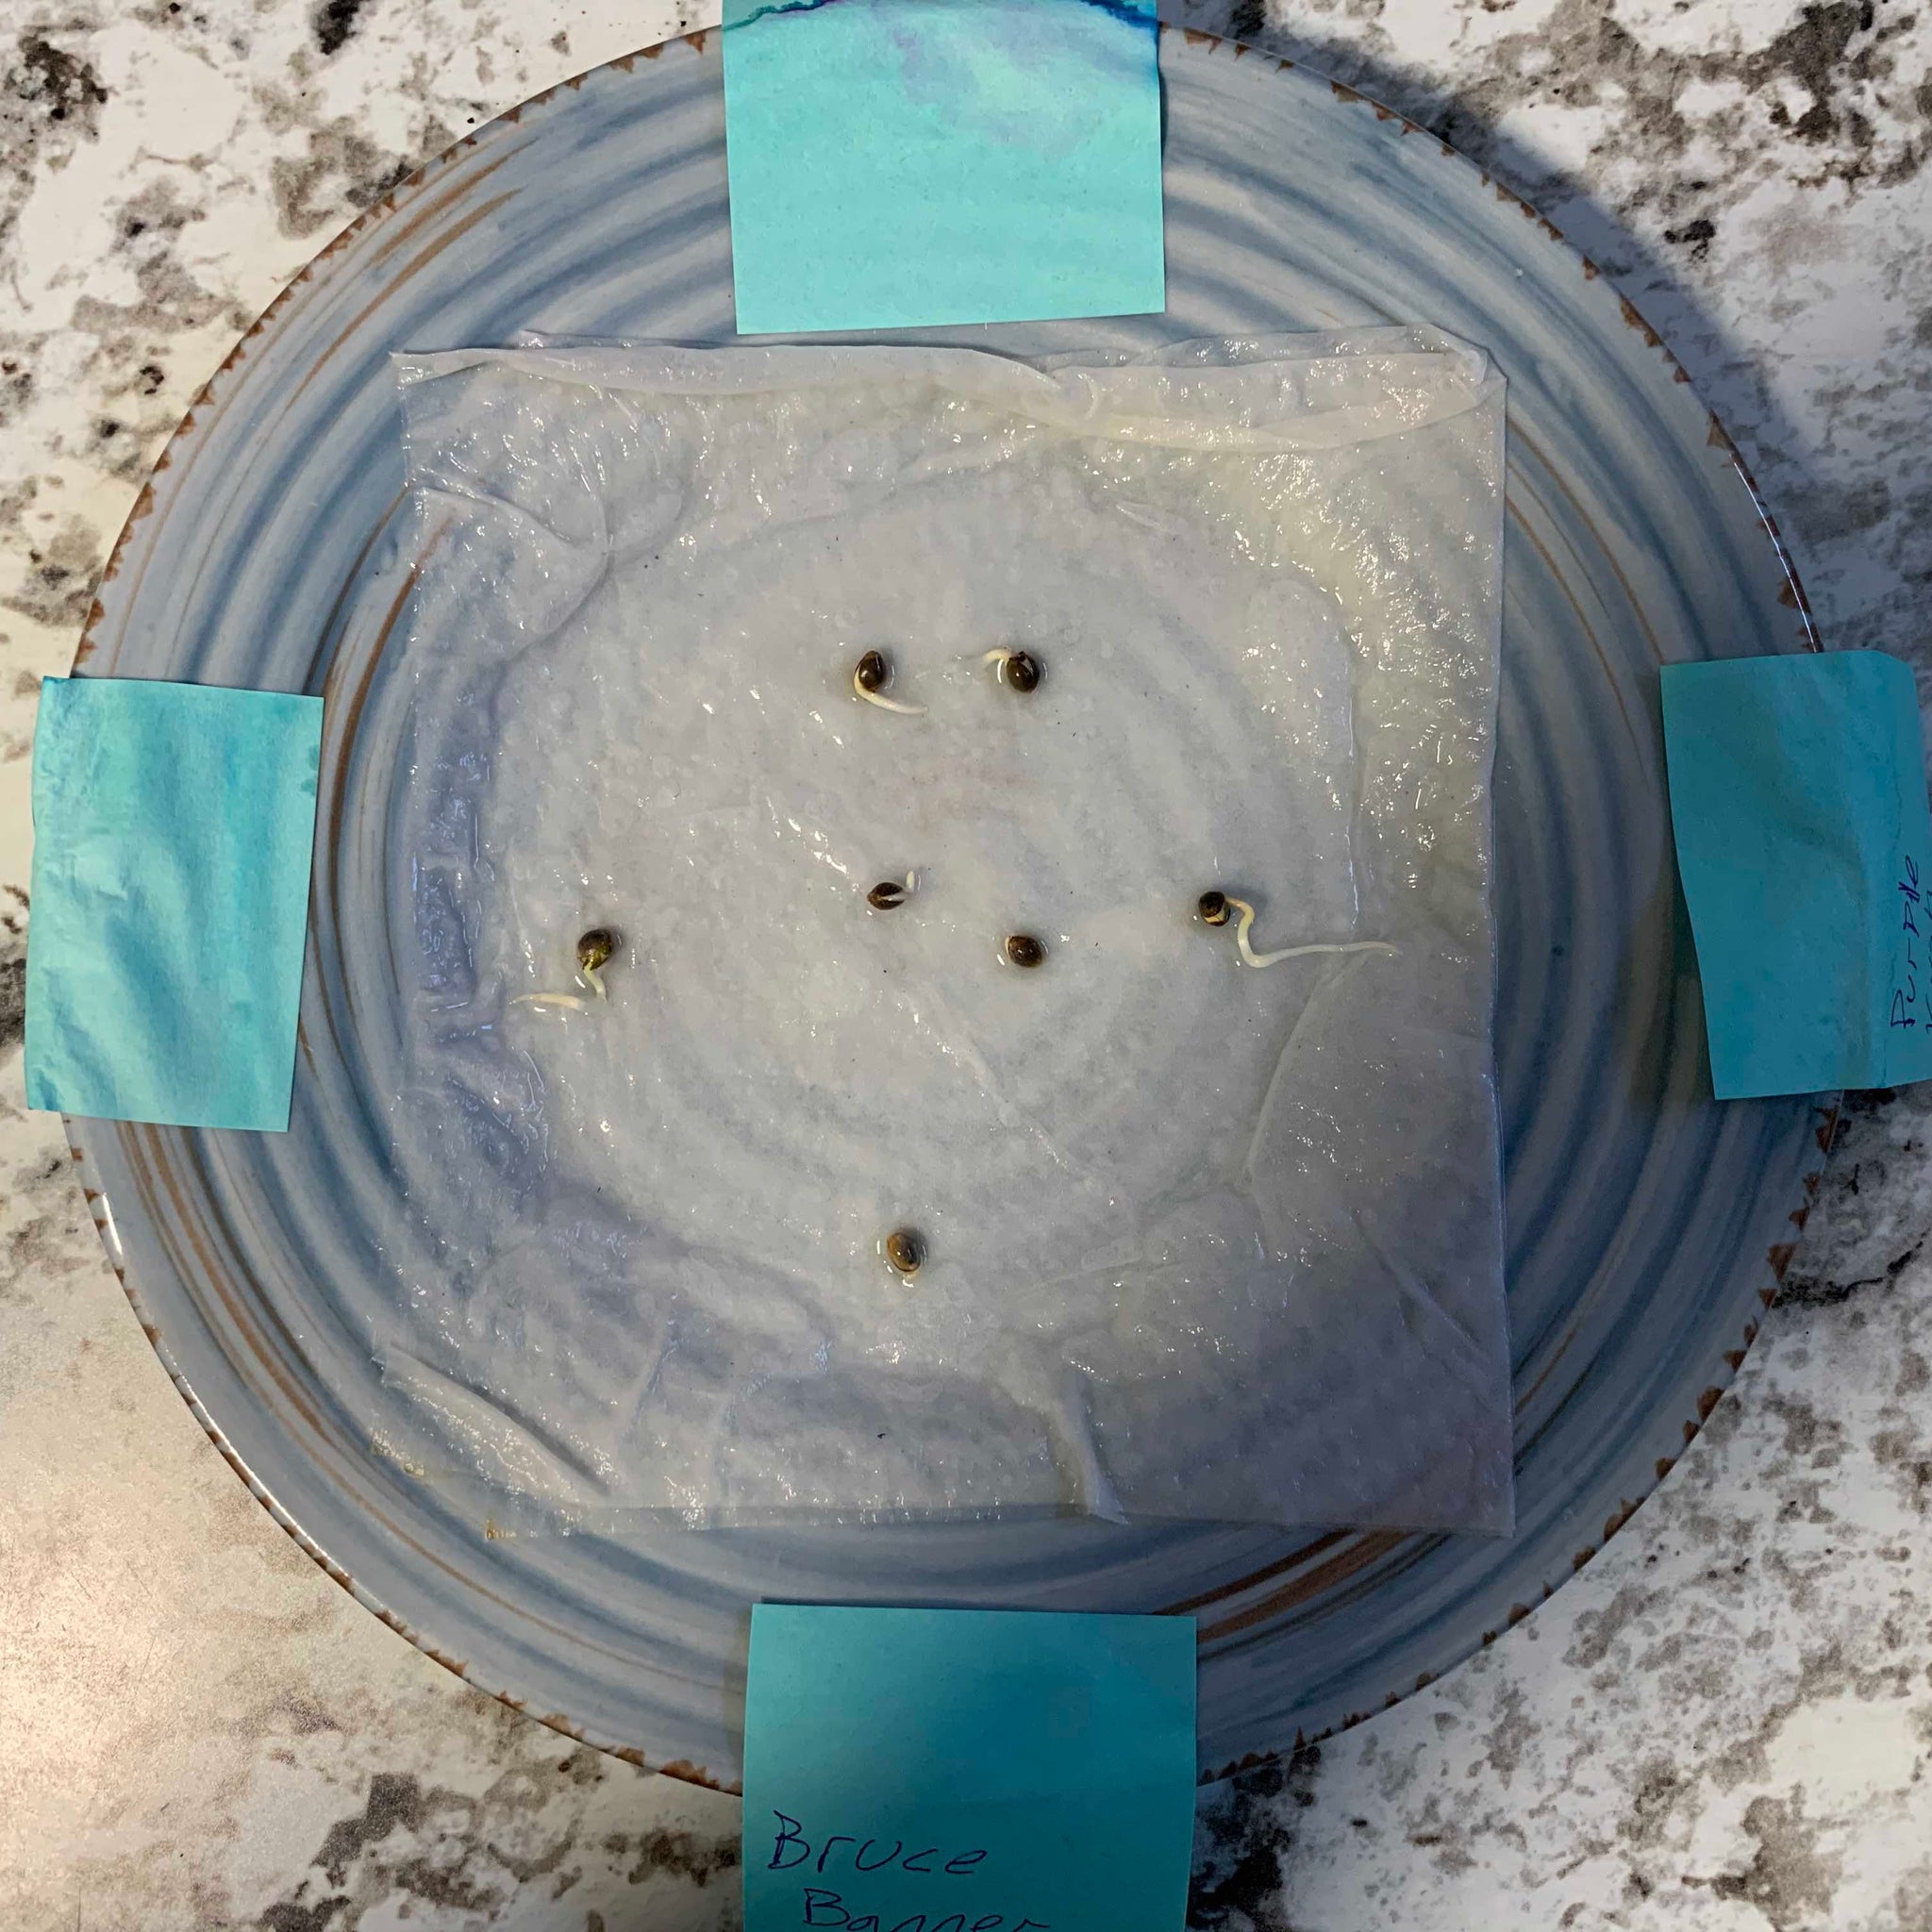 Top view of a germination plate with damp paper towels and seeds spaced out, secured with blue sticky notes labeled 'Bruce Banner' and 'Purple.' The plate is on a marble countertop with a speckled pattern.